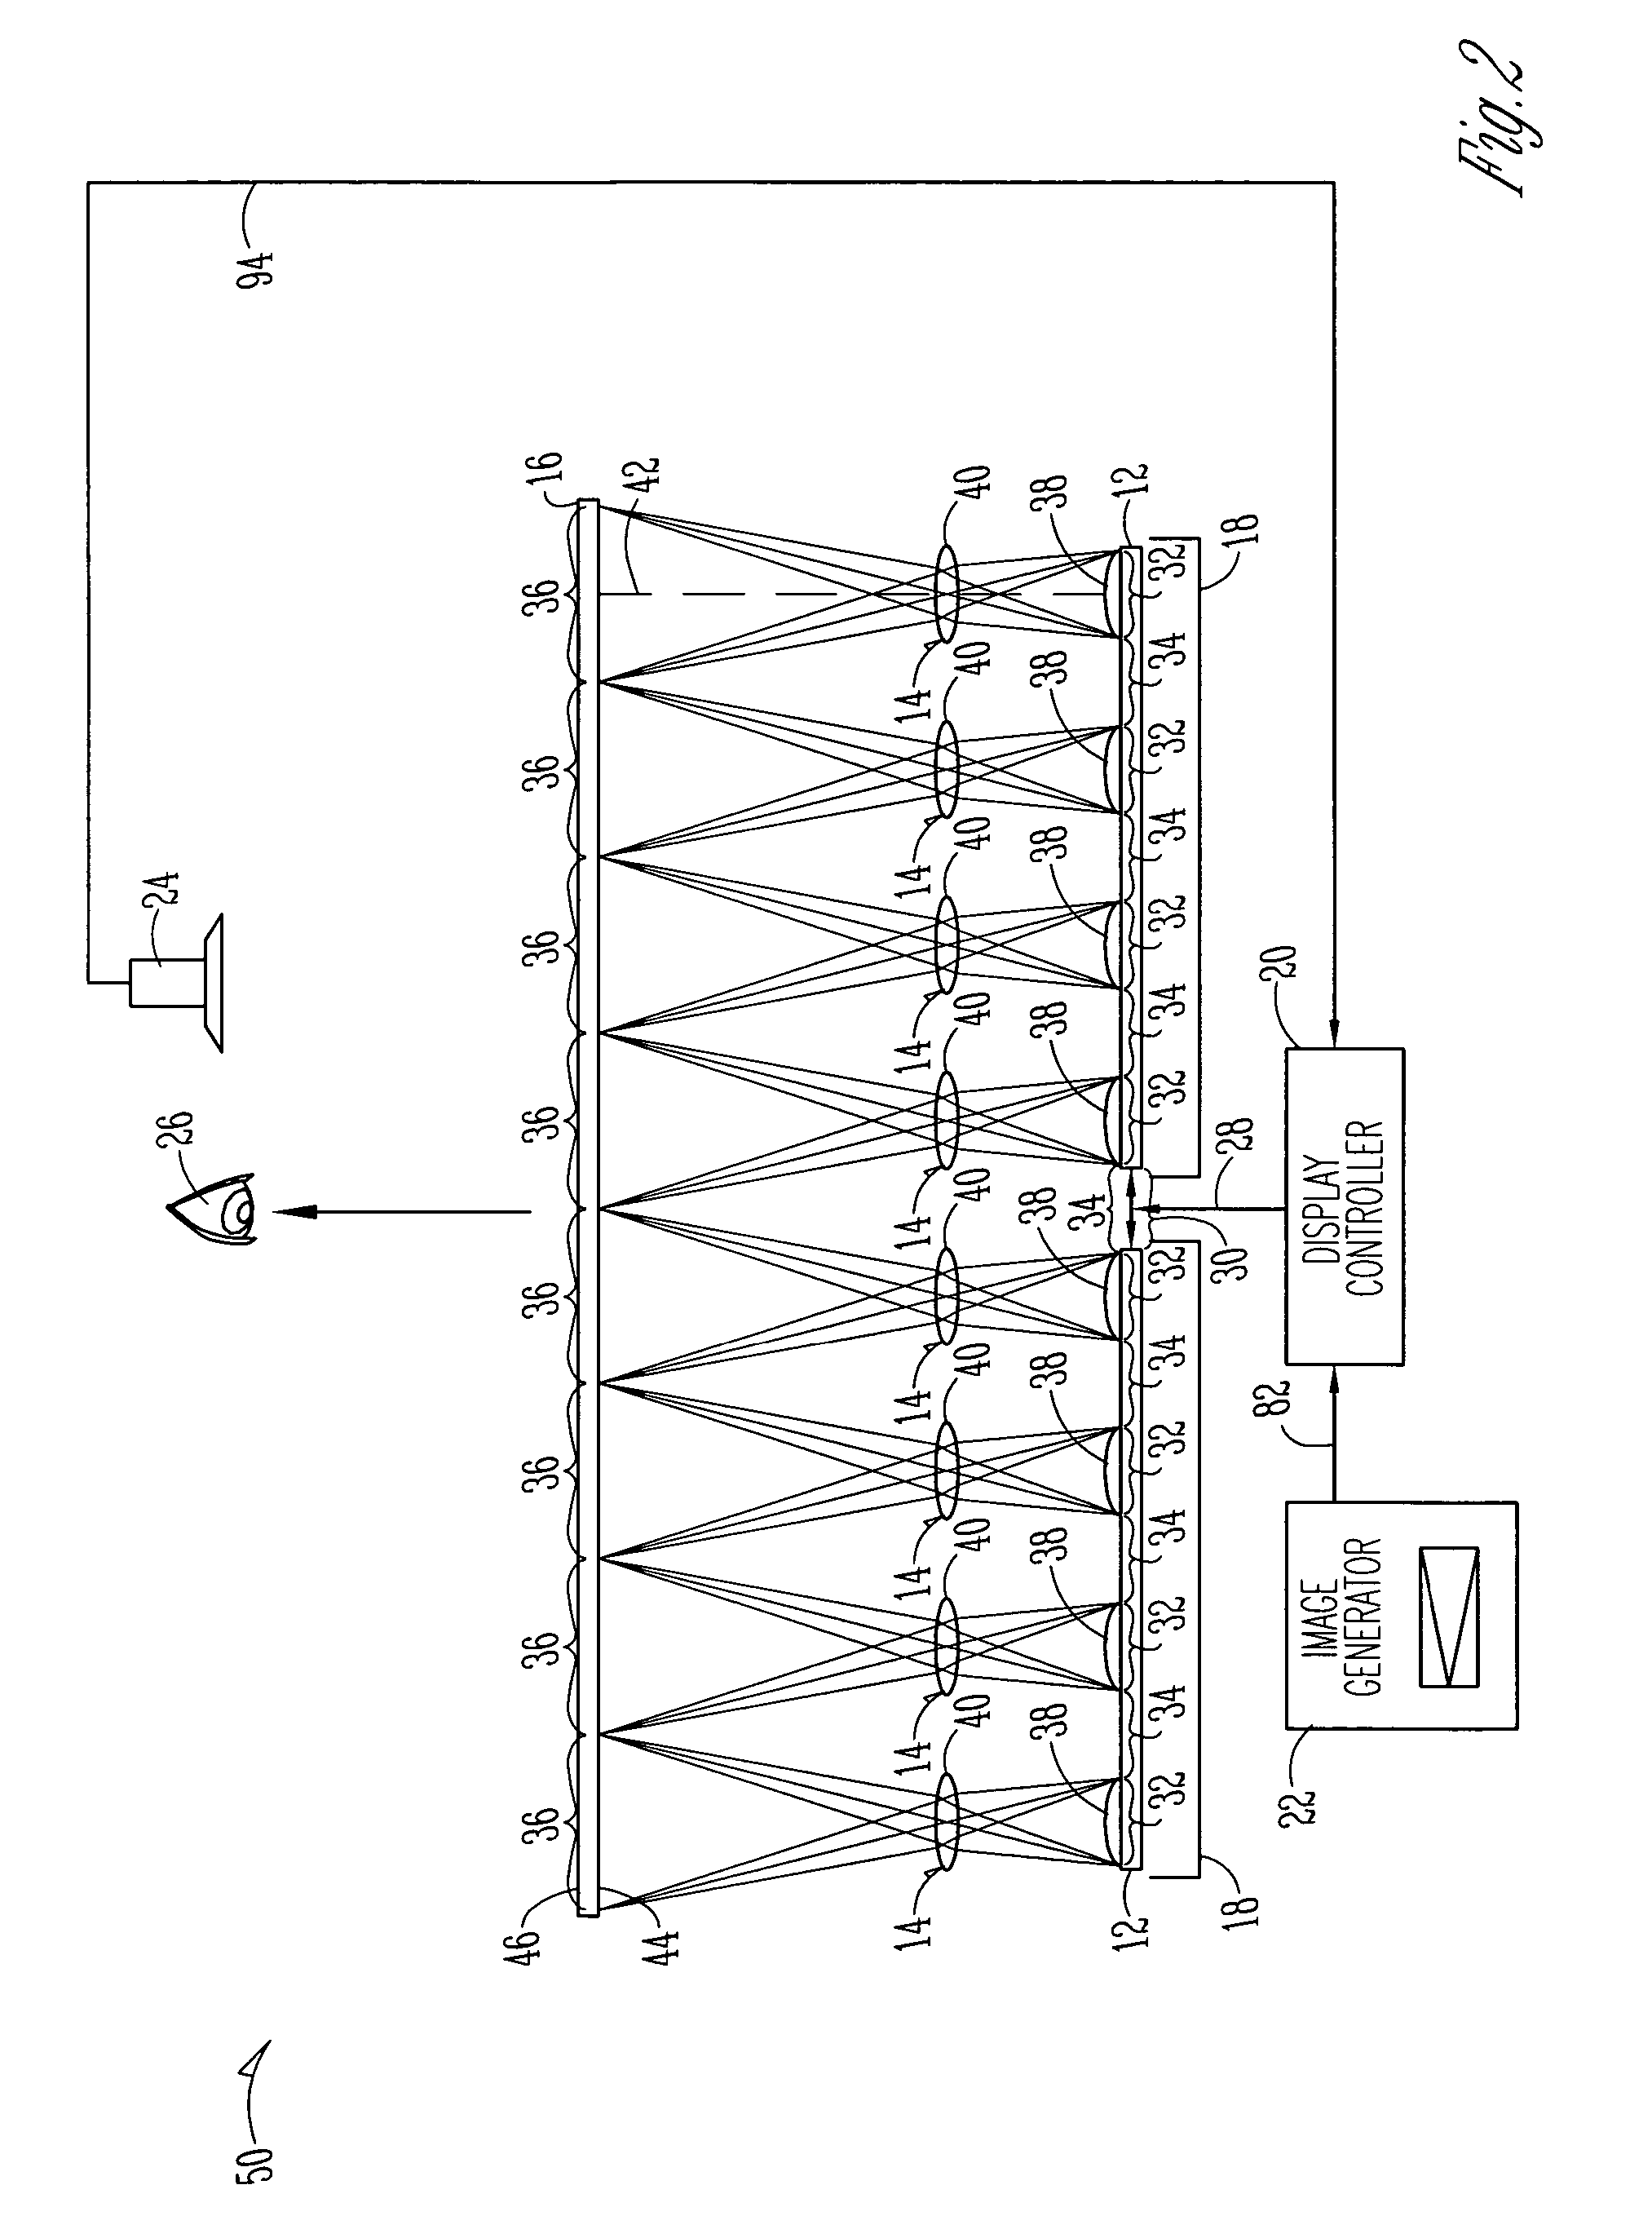 Distortion control for a seamless tile display system